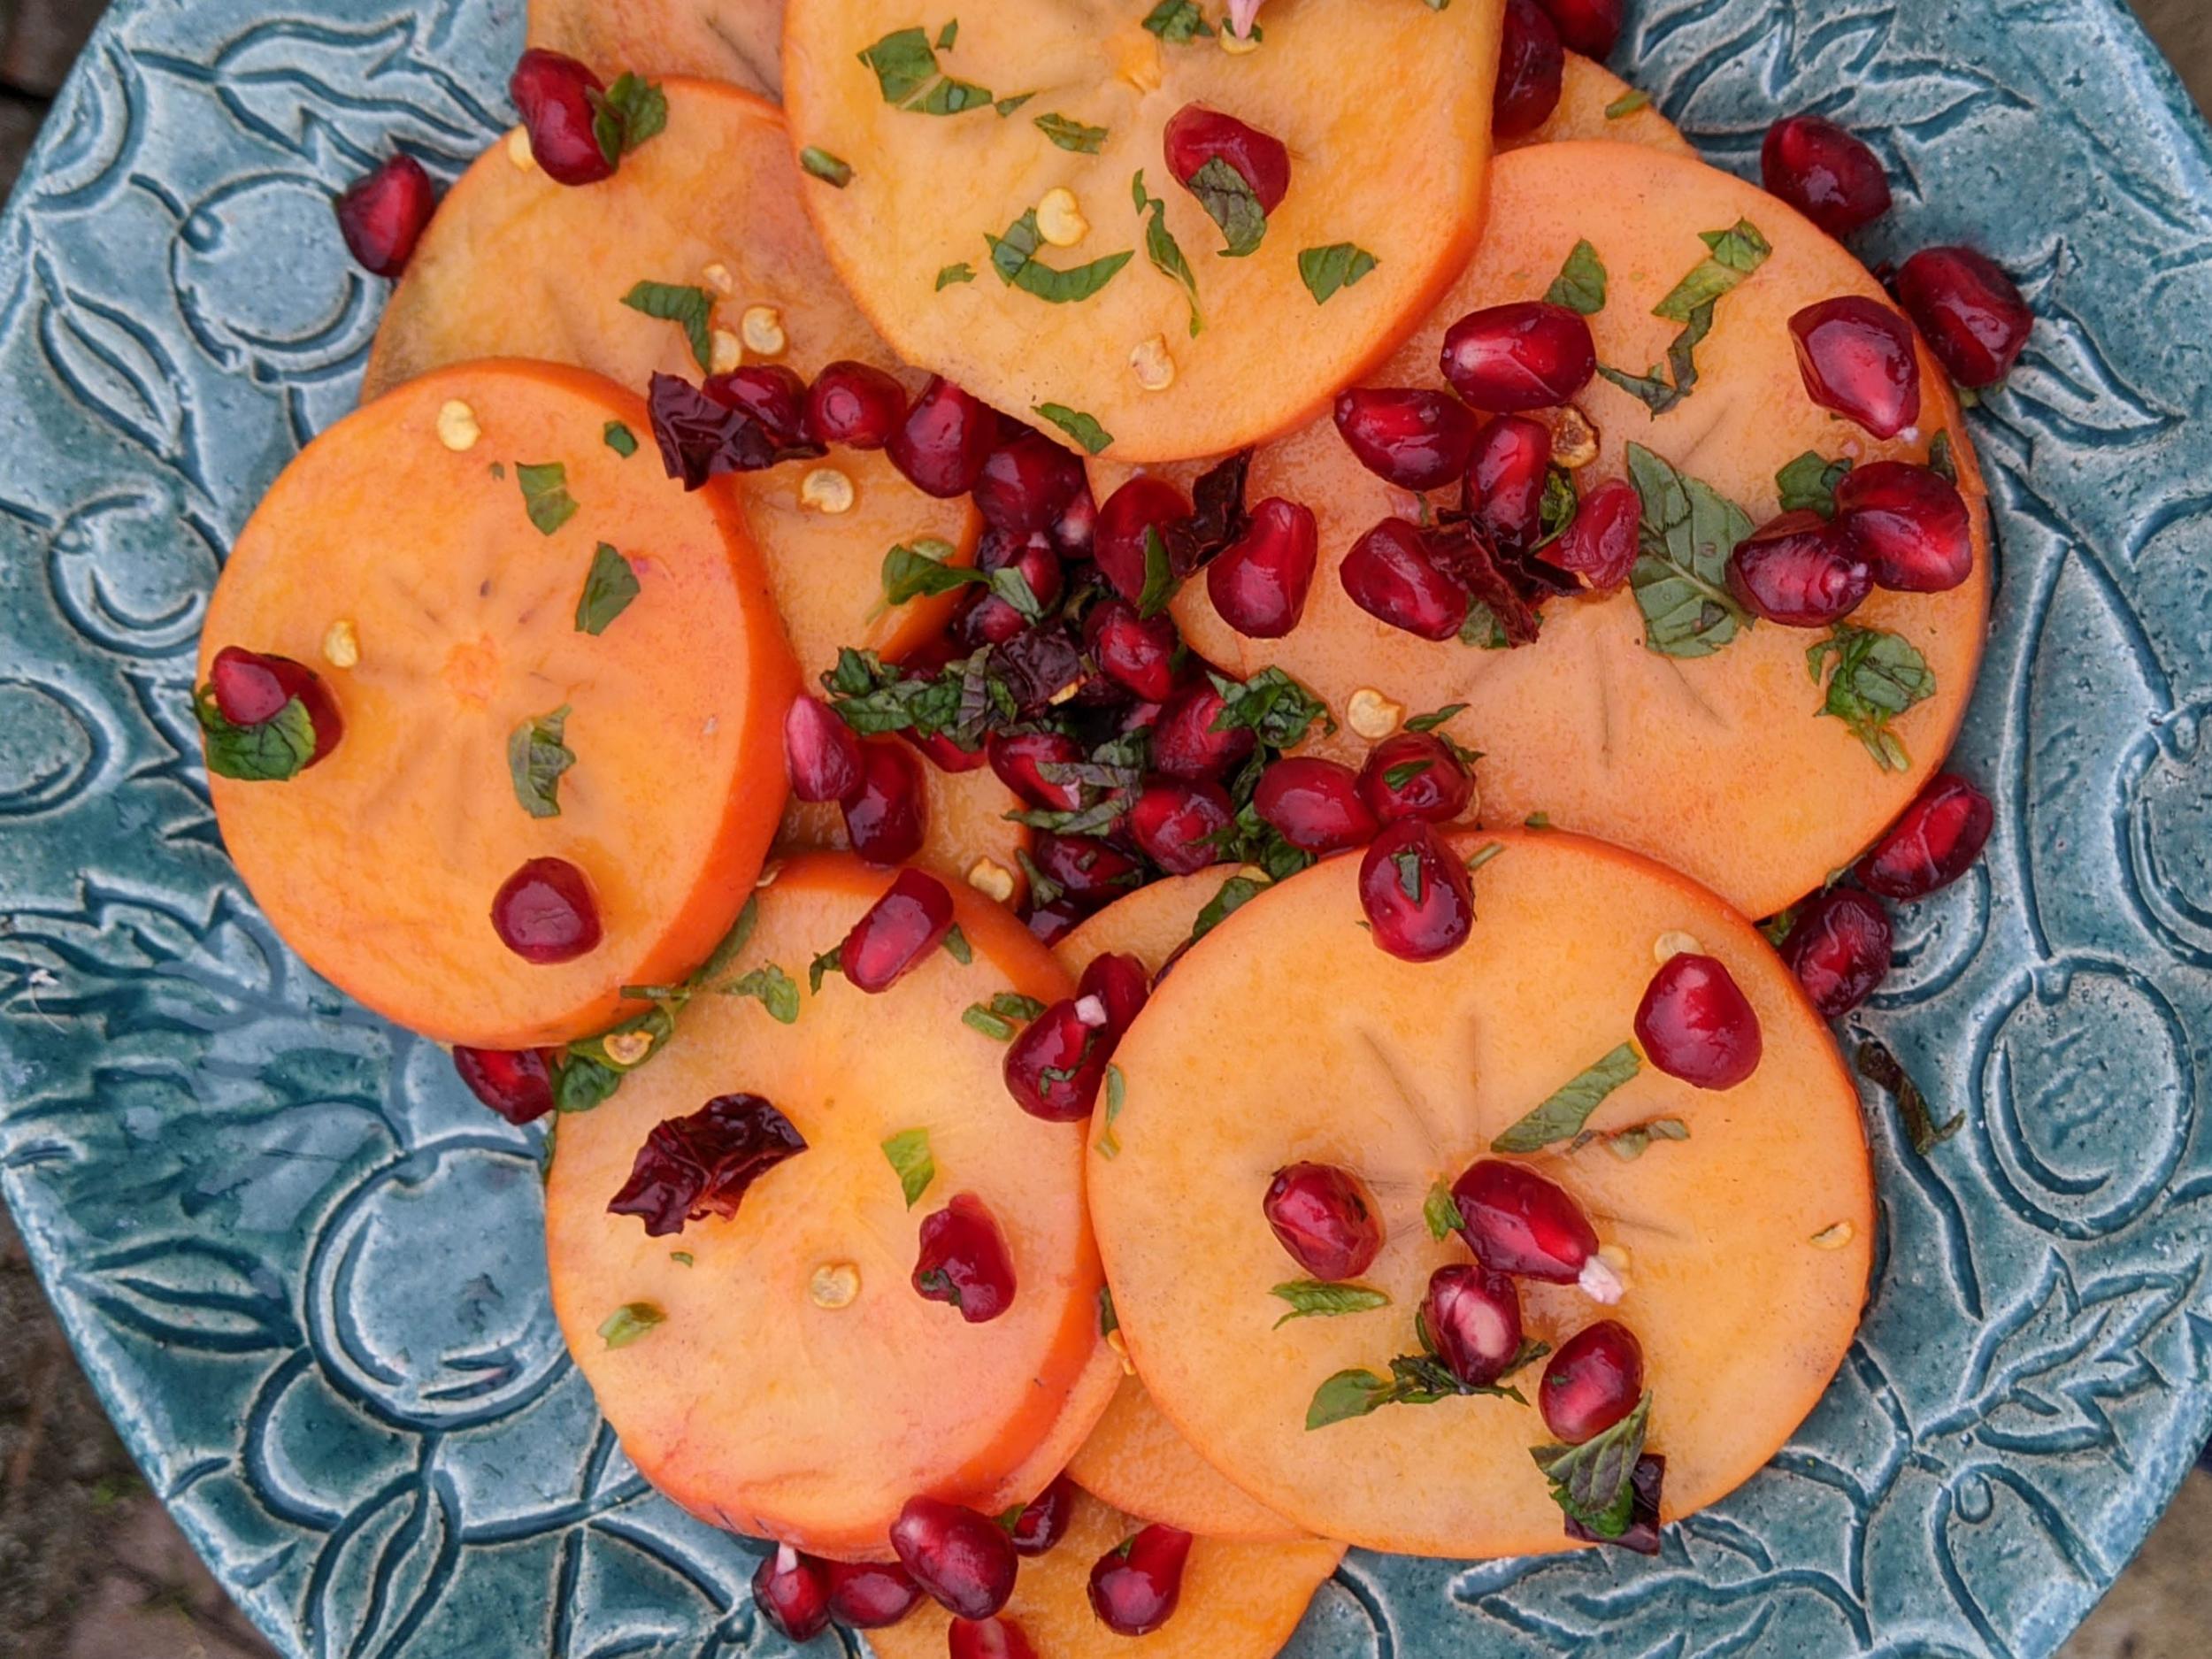 Persimmons are best enjoyed with a few other ingredients